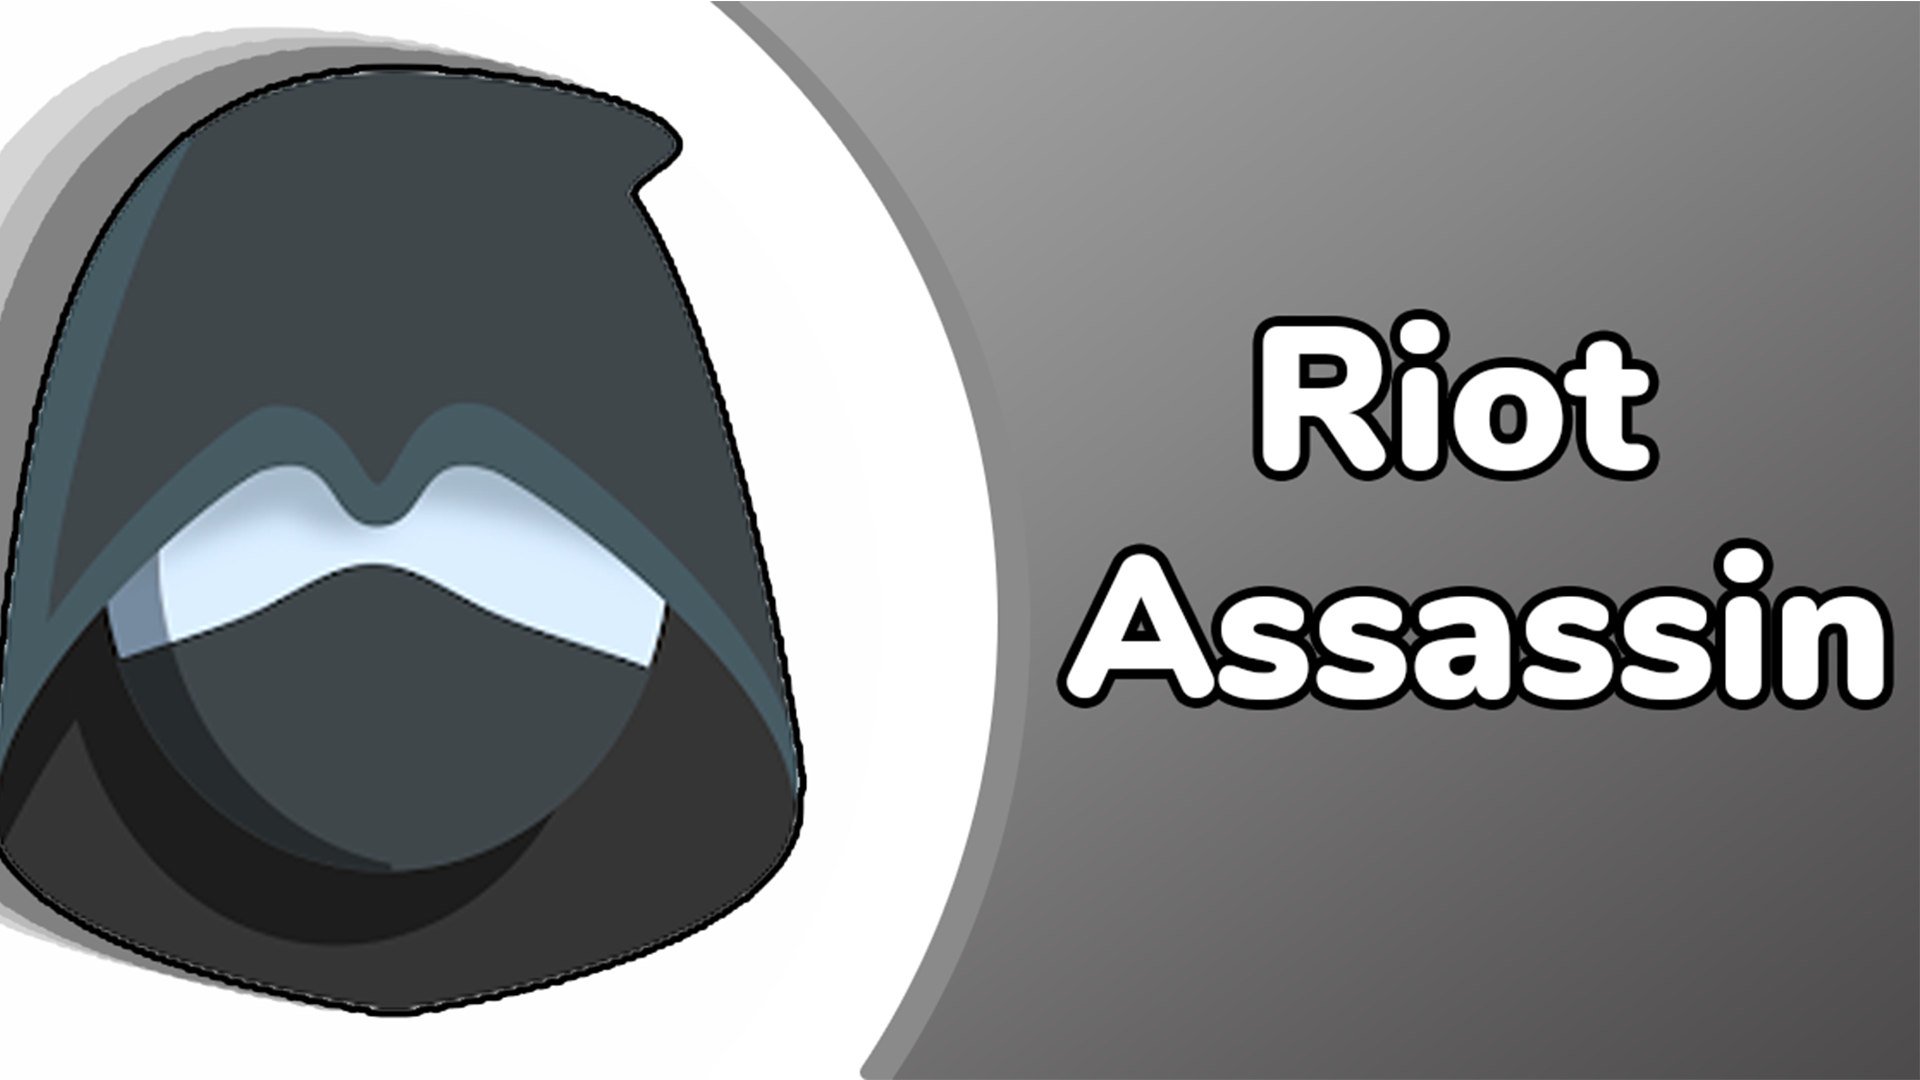 Riot Assassin Game Image